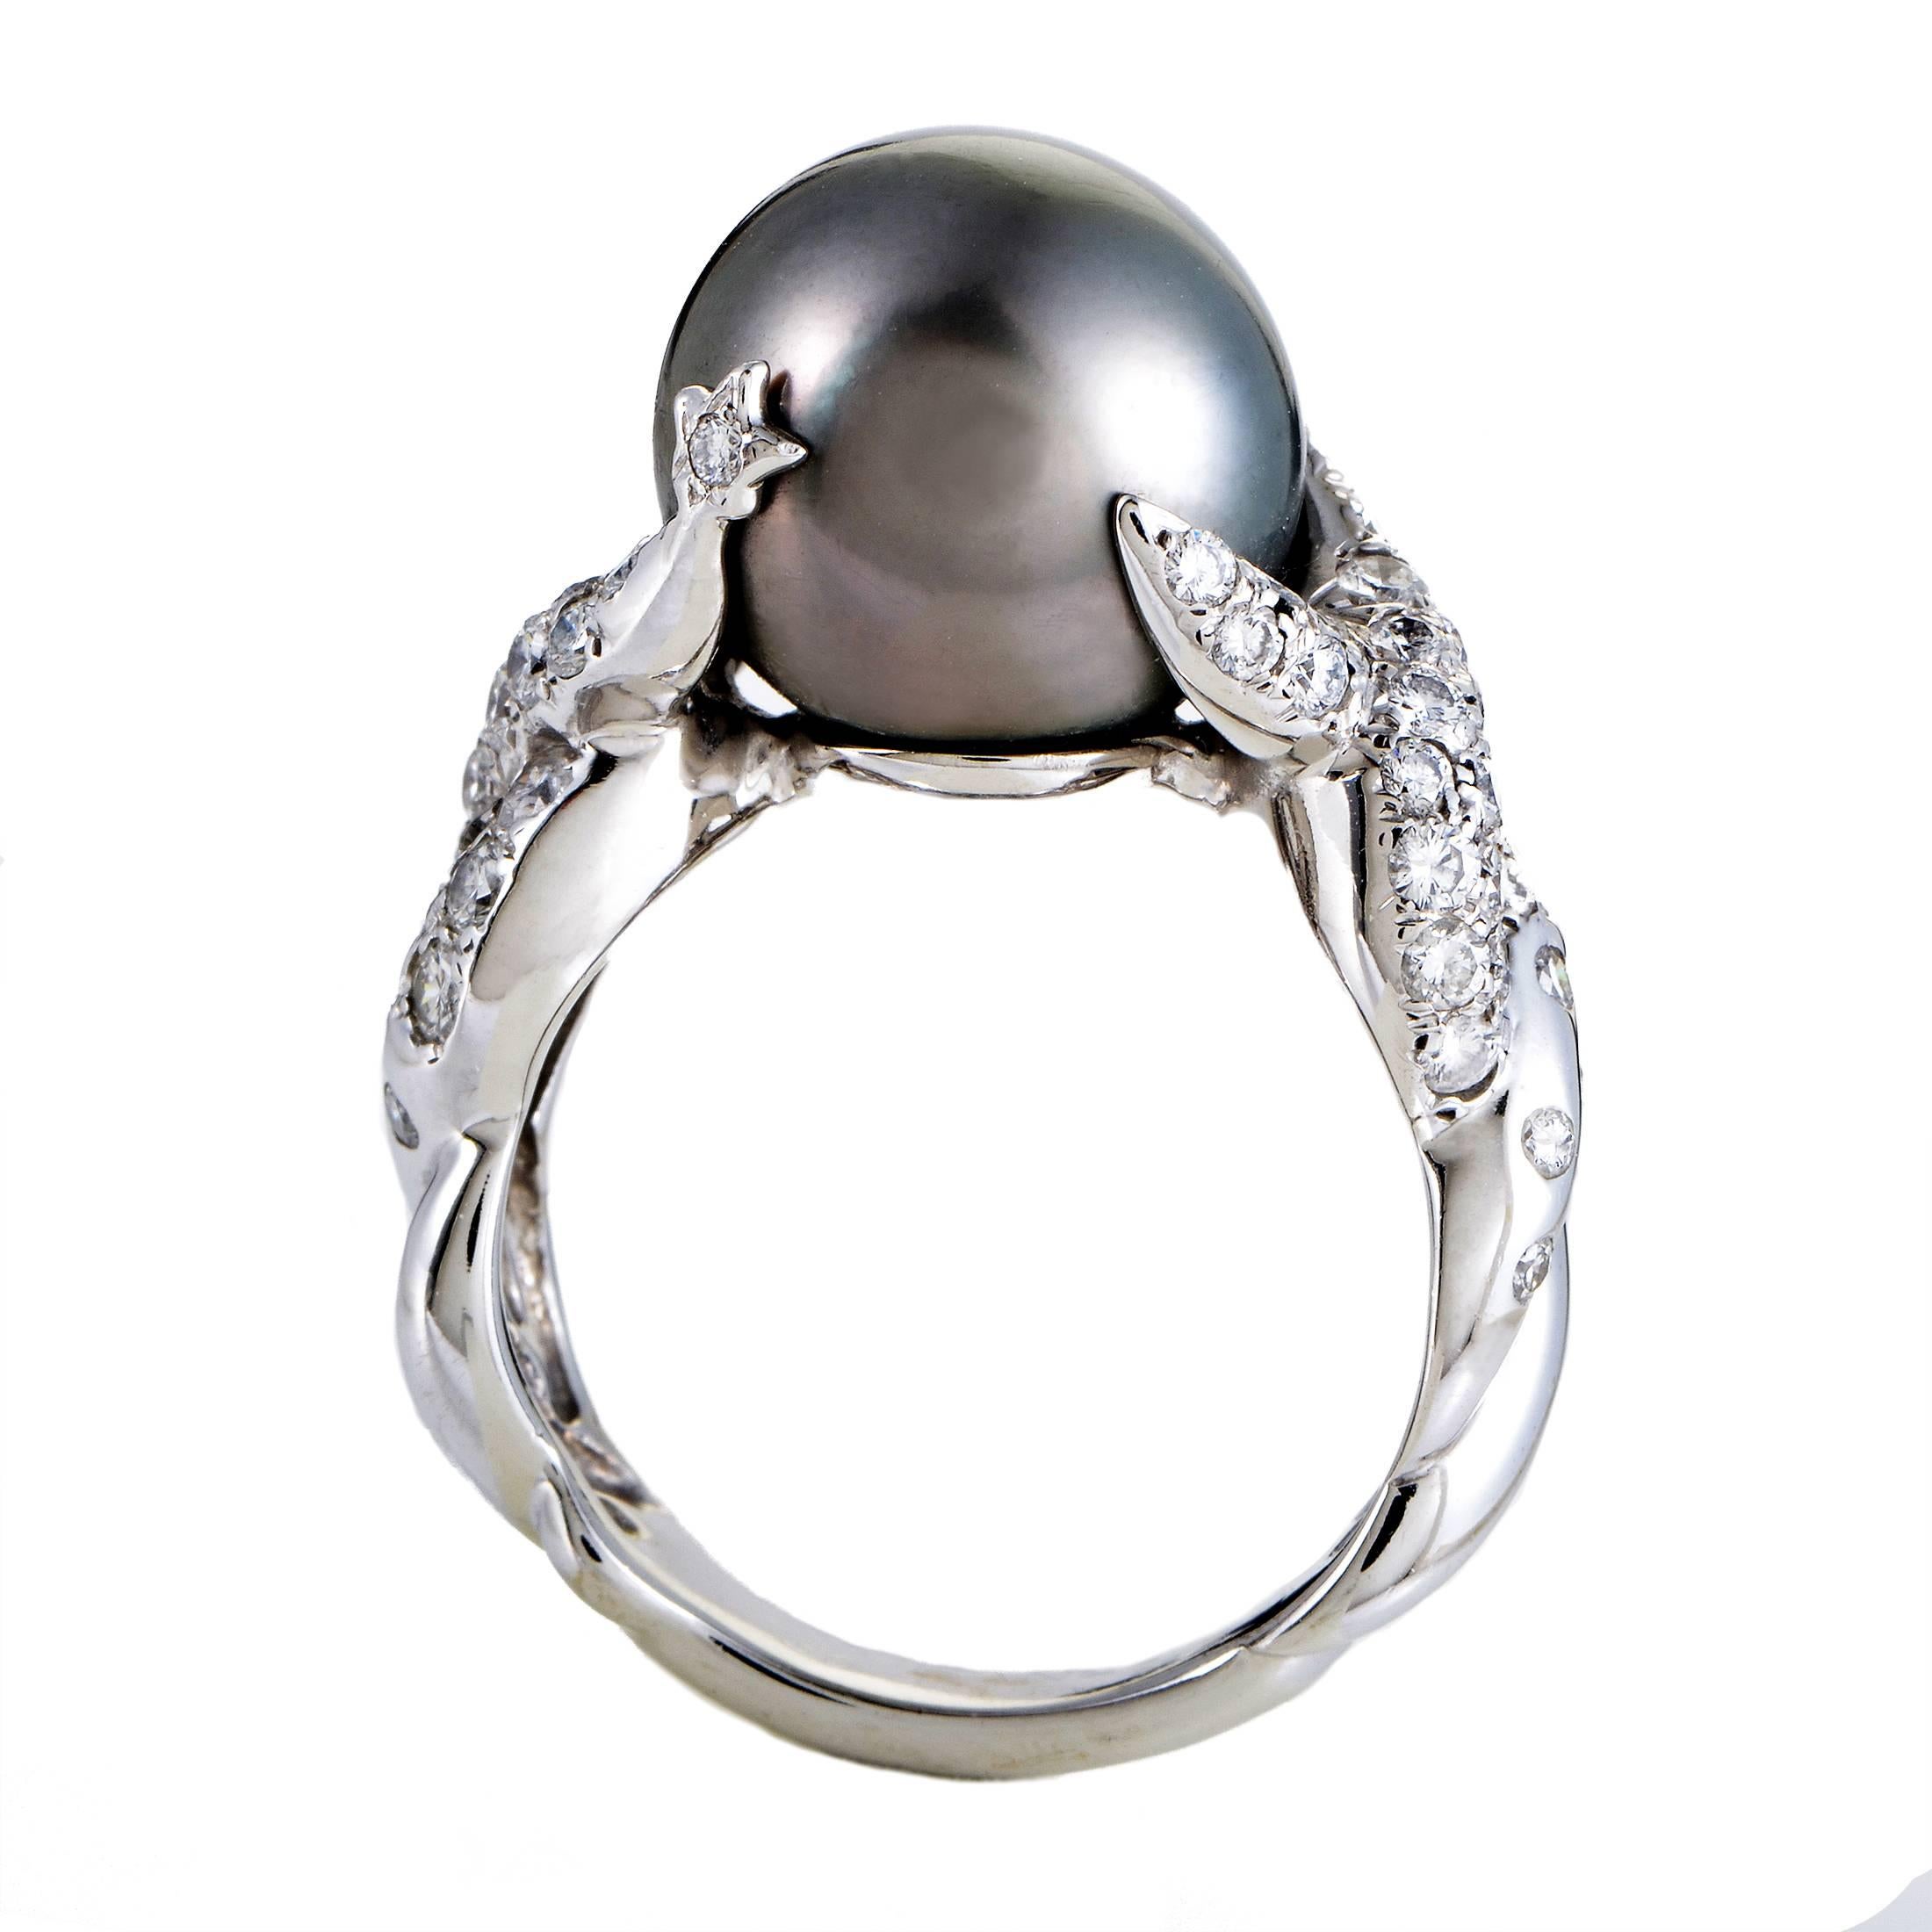 Held firmly and gracefully by the marvelously entwined 18K white gold body that is embellished with scintillating diamonds weighing in total 0.80ct, the captivating 12mm Tahitian pearl produces a memorable sight in this fascinating ring from